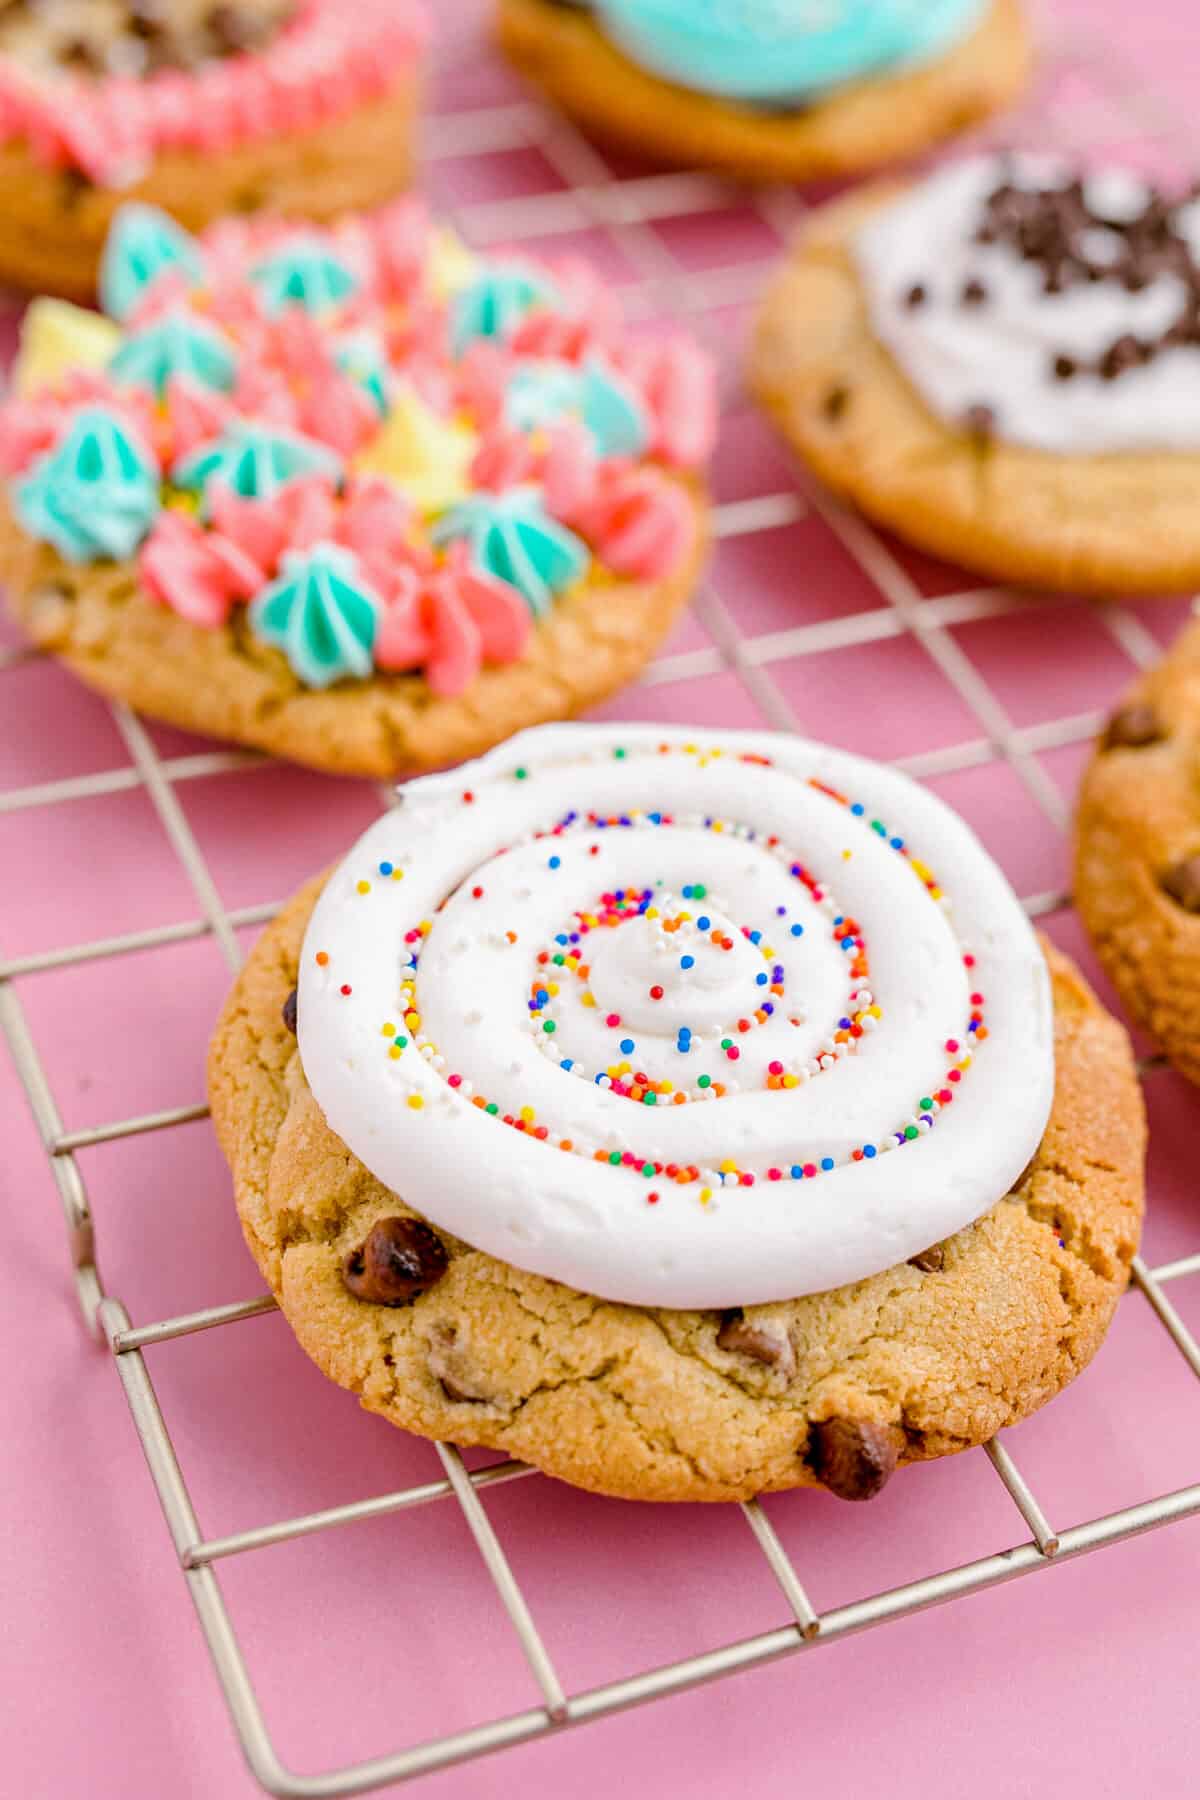 A chocolate chip crumbl cookie with white frosting